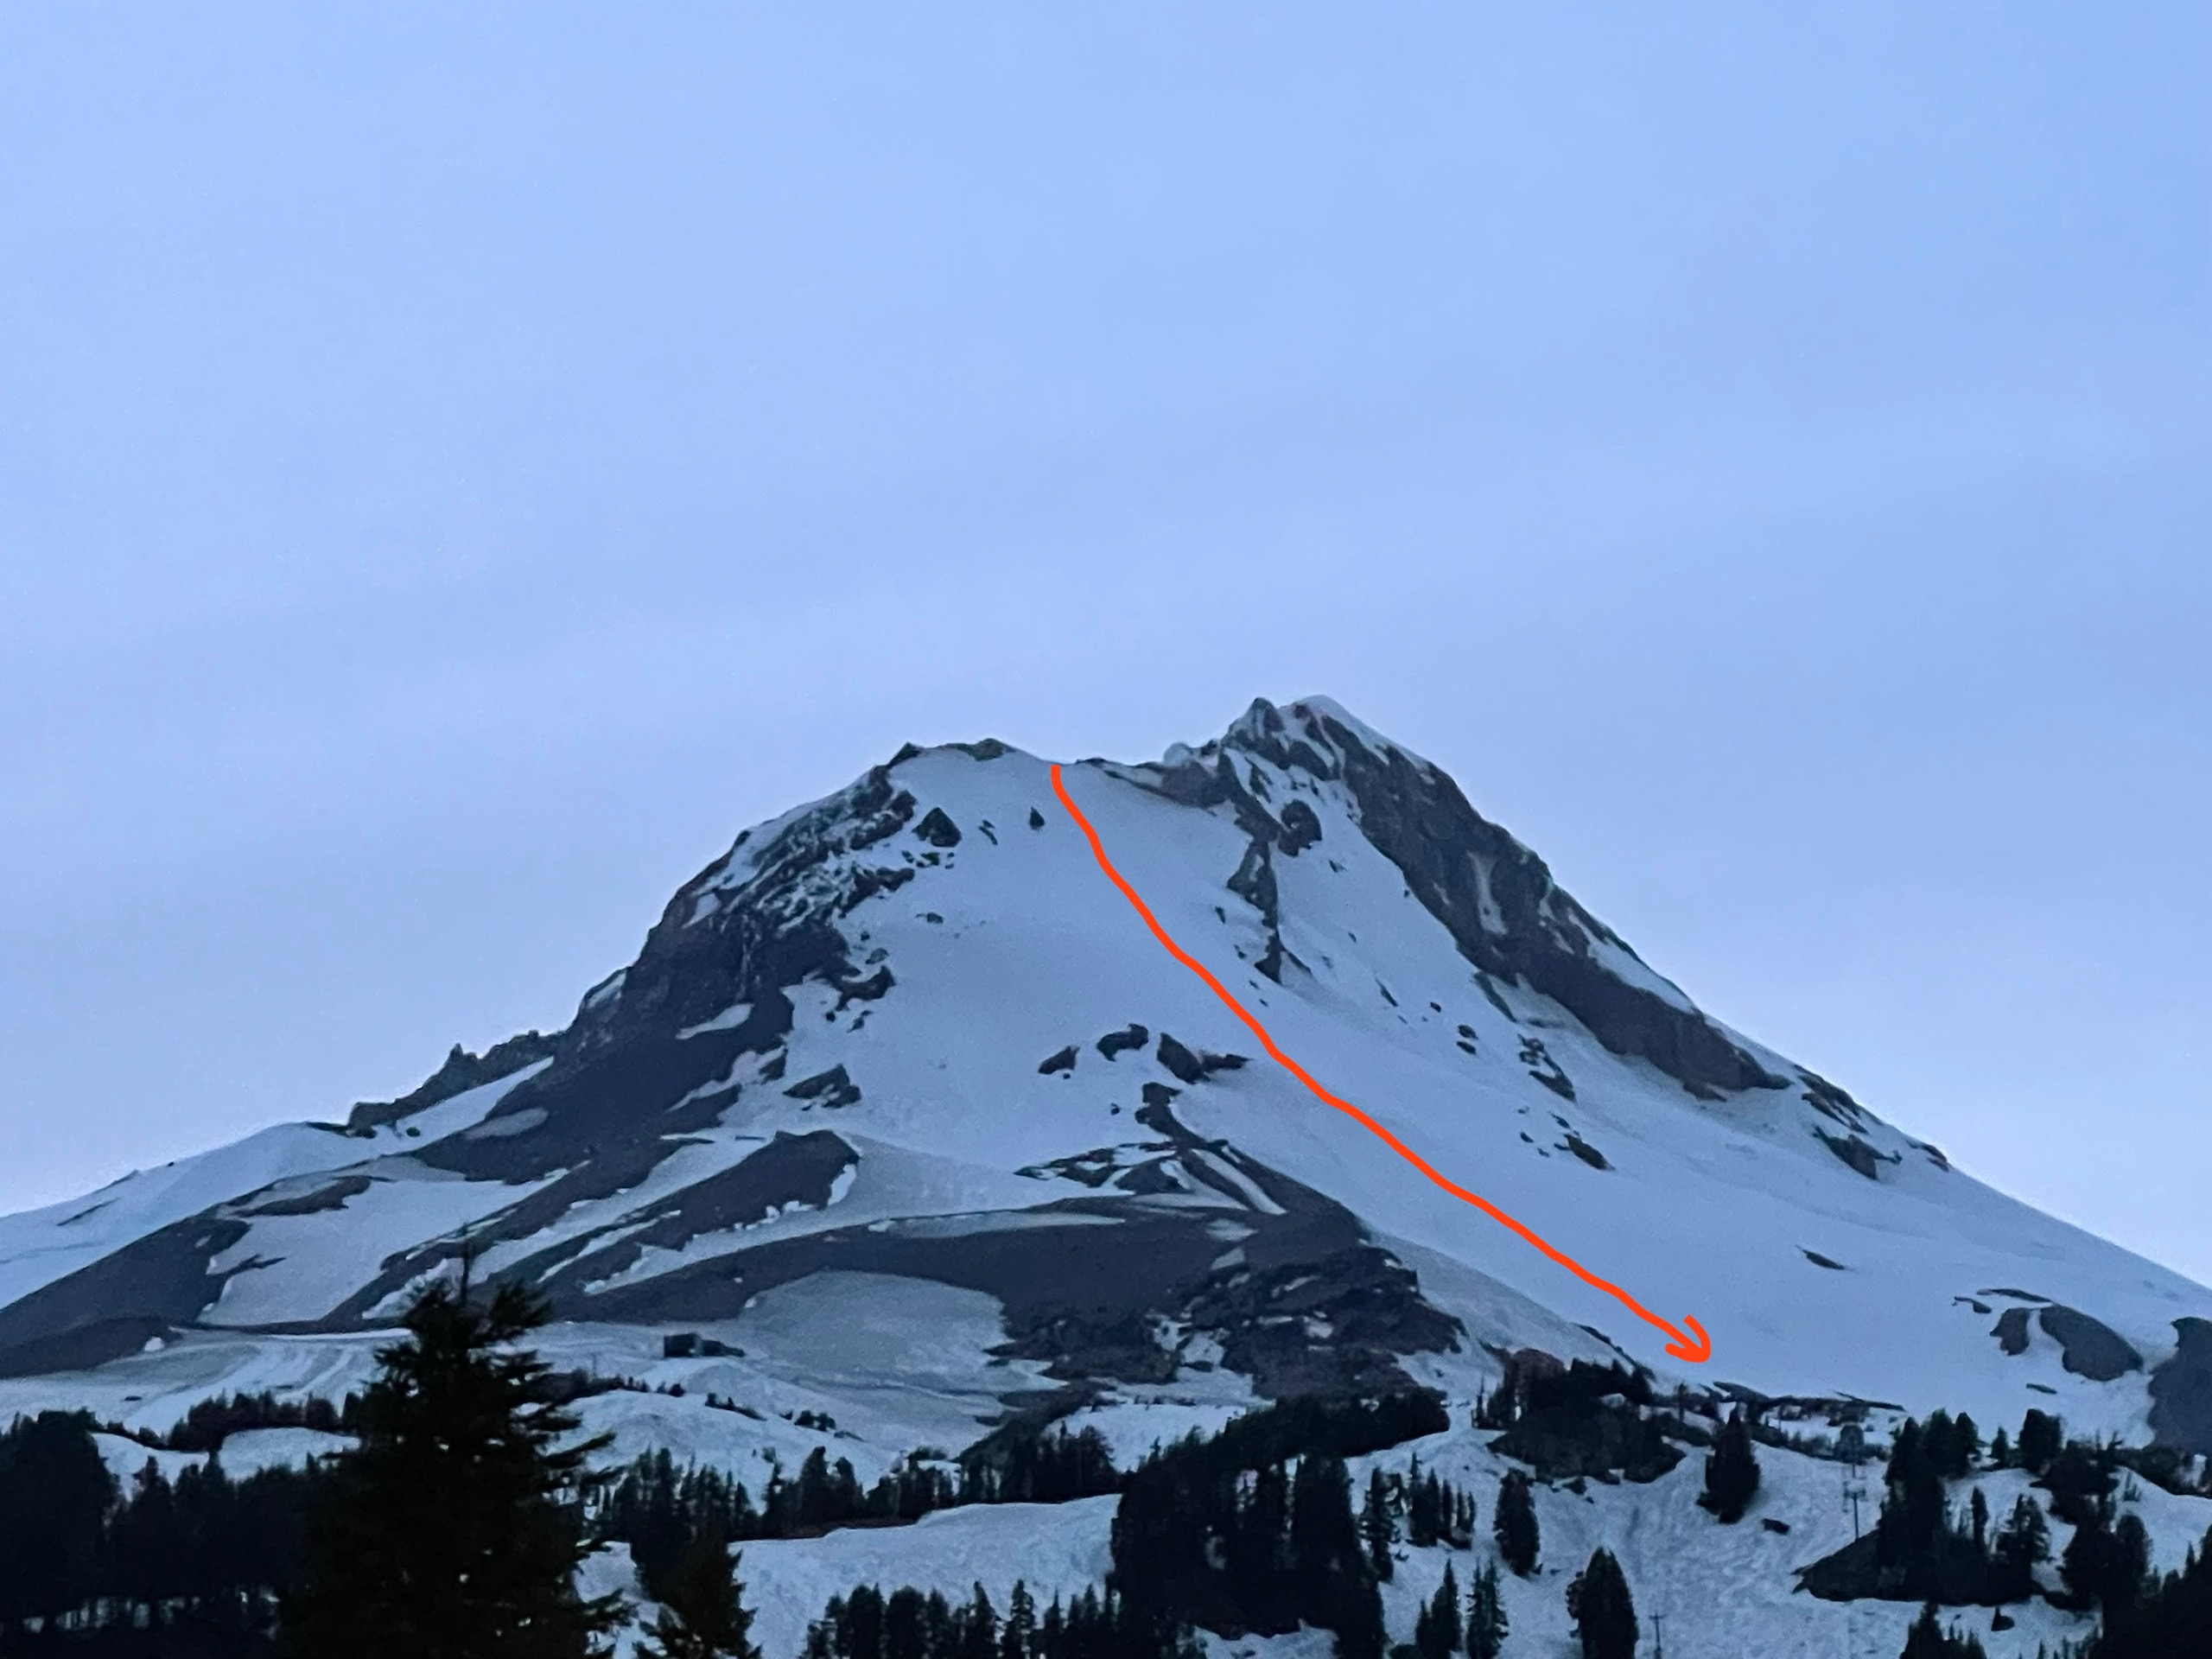 A photo of Wy'east from the southeast at dusk. The upper mountain is blanketed in snow, and the snow fields break up and become patchy at lower elevations, revealing brown volcanic rock. A red line outlines our planned route through the snow.